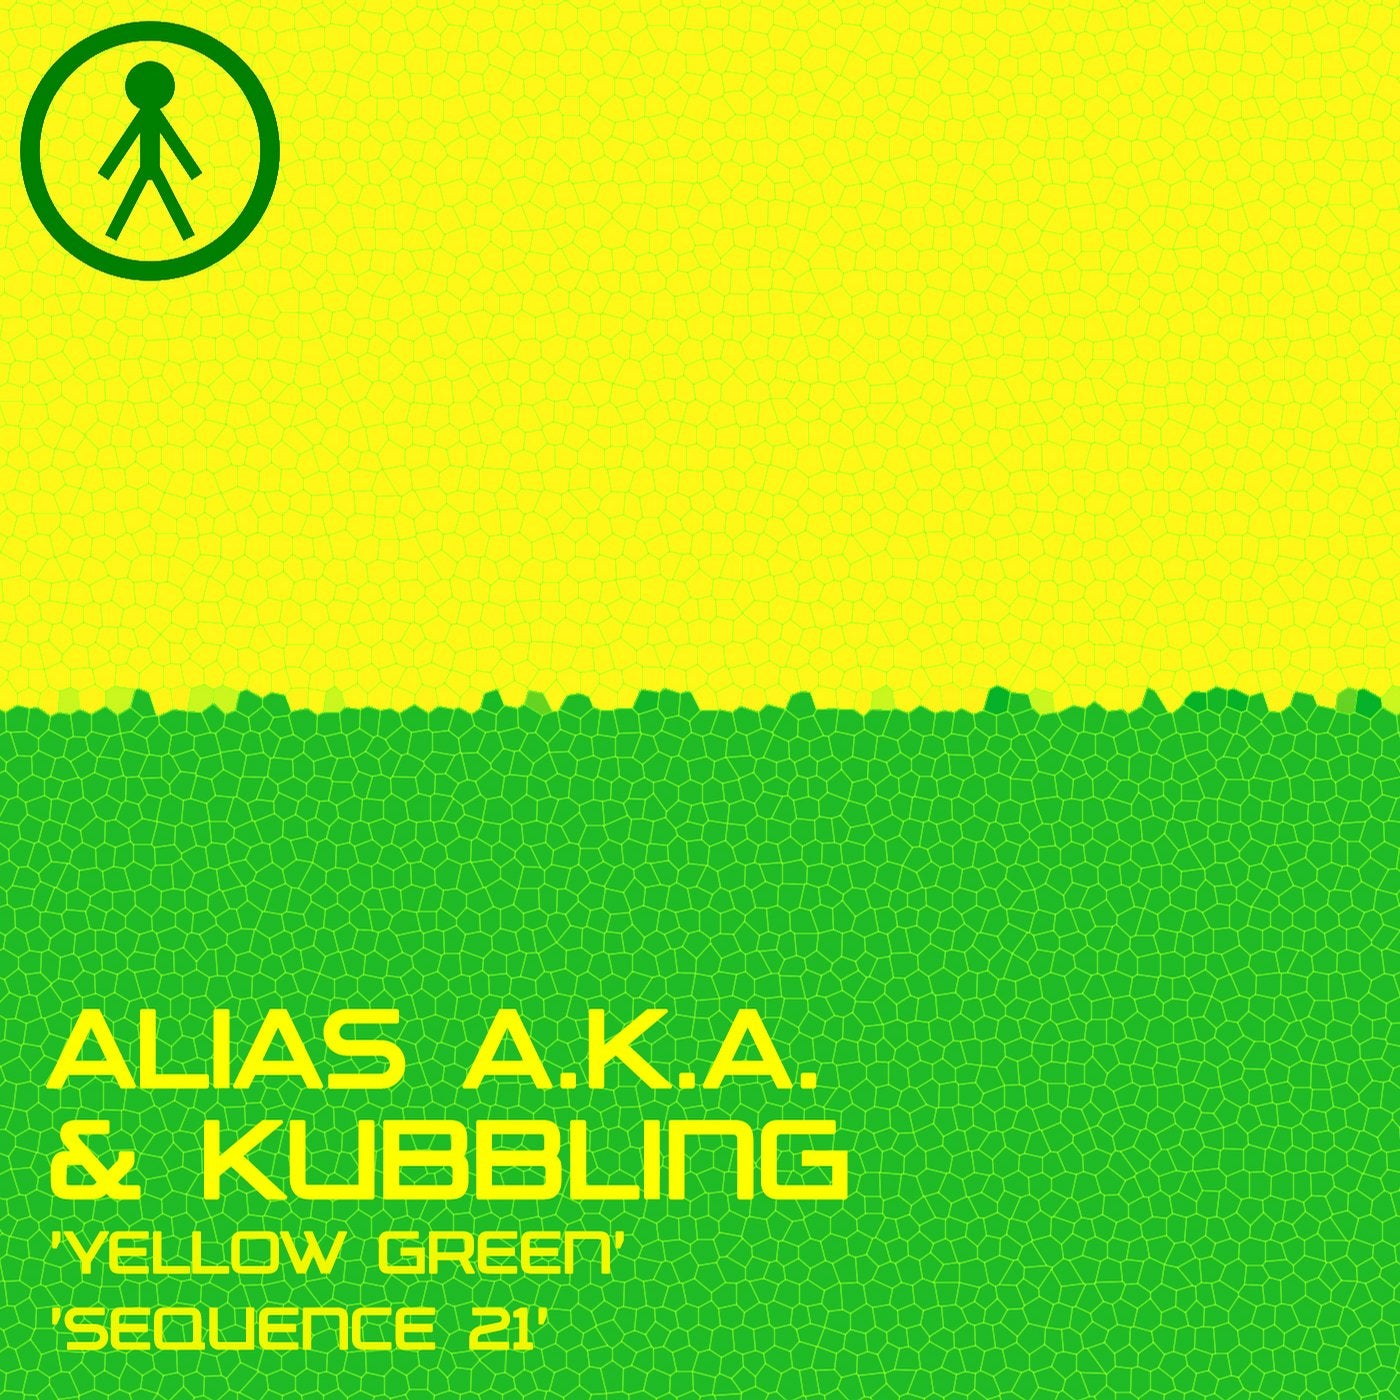 Alias A.K.A. & Kubbling - Yellow Green / Sequence 21